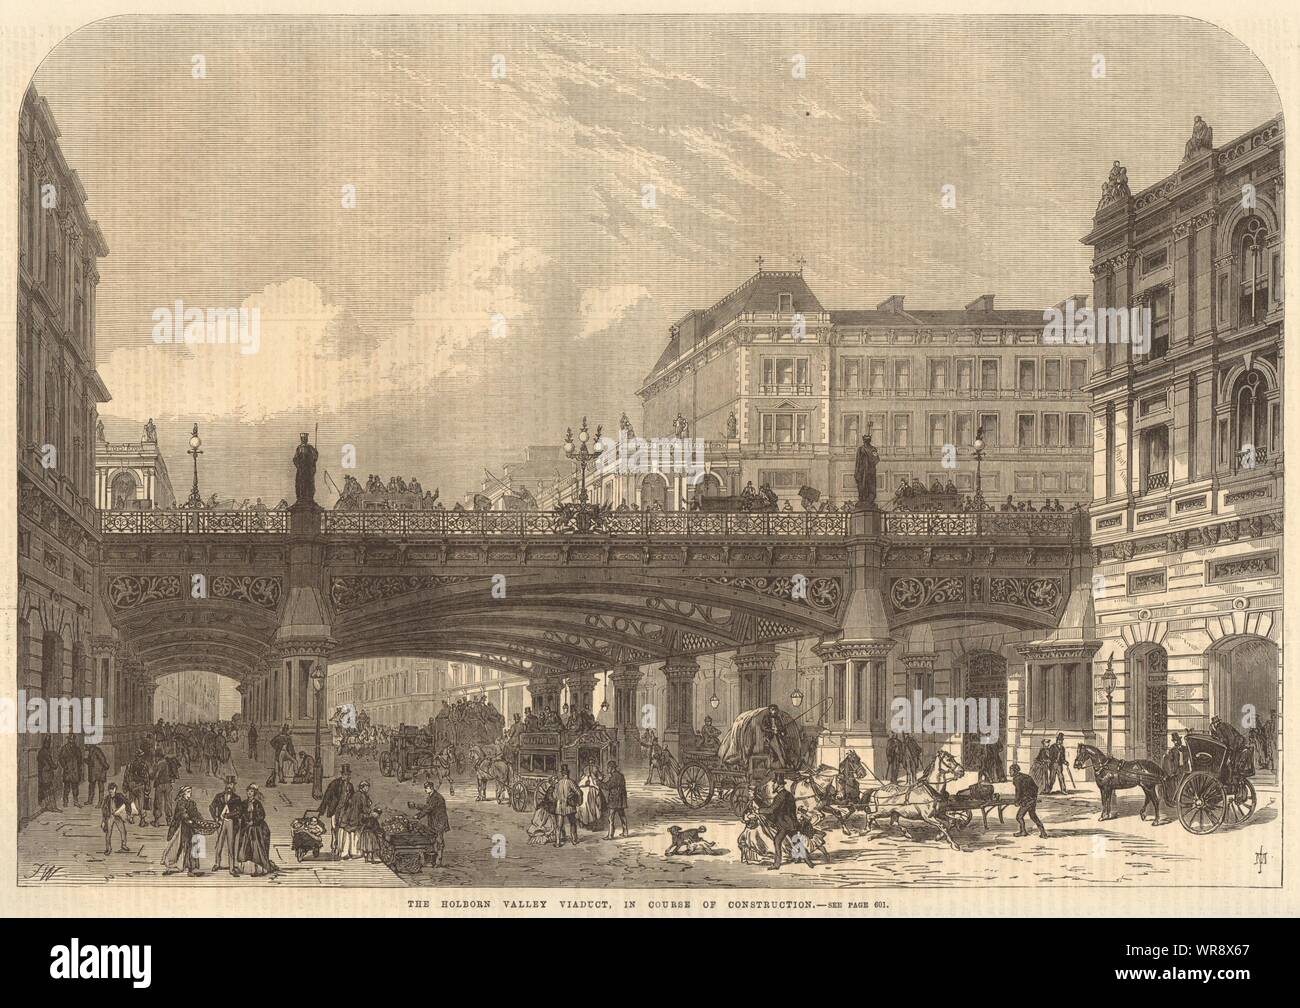 The Holborn Valley Viaduct, in course of construction. London 1867 ILN print Stock Photo